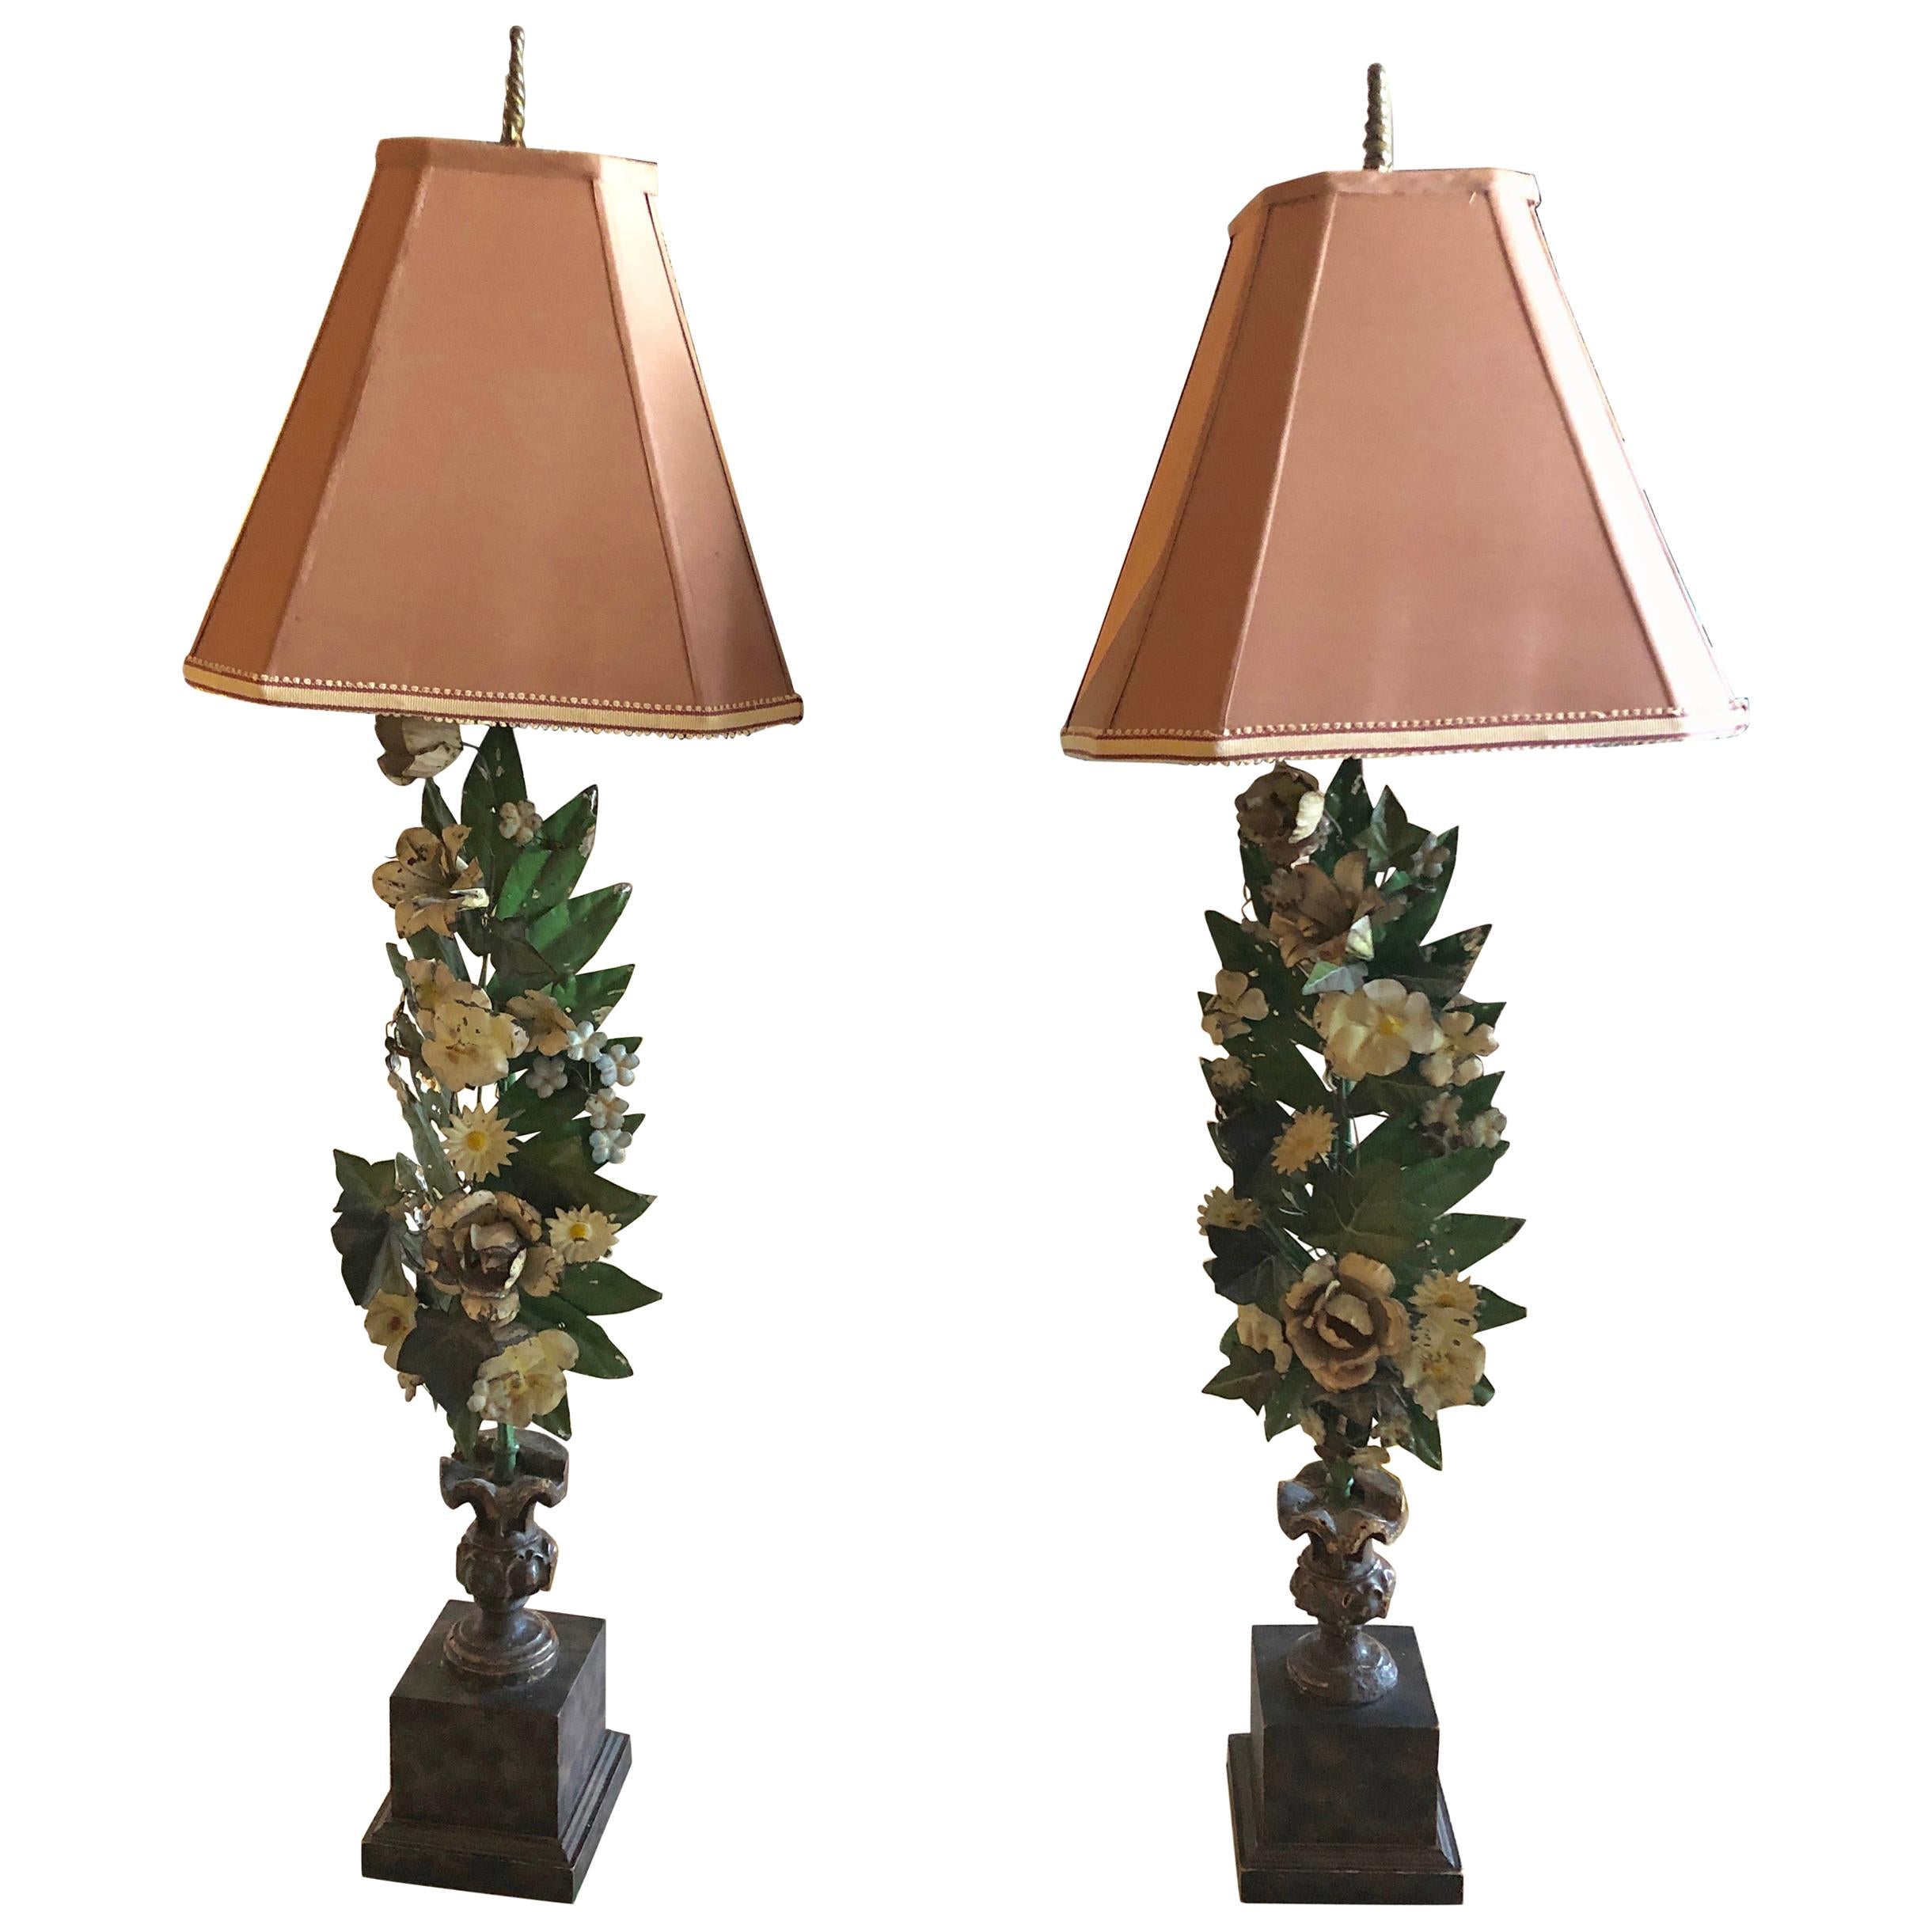 Gorgeous Pair of French Antique Tole Table Lamps with Flowers and Leaves